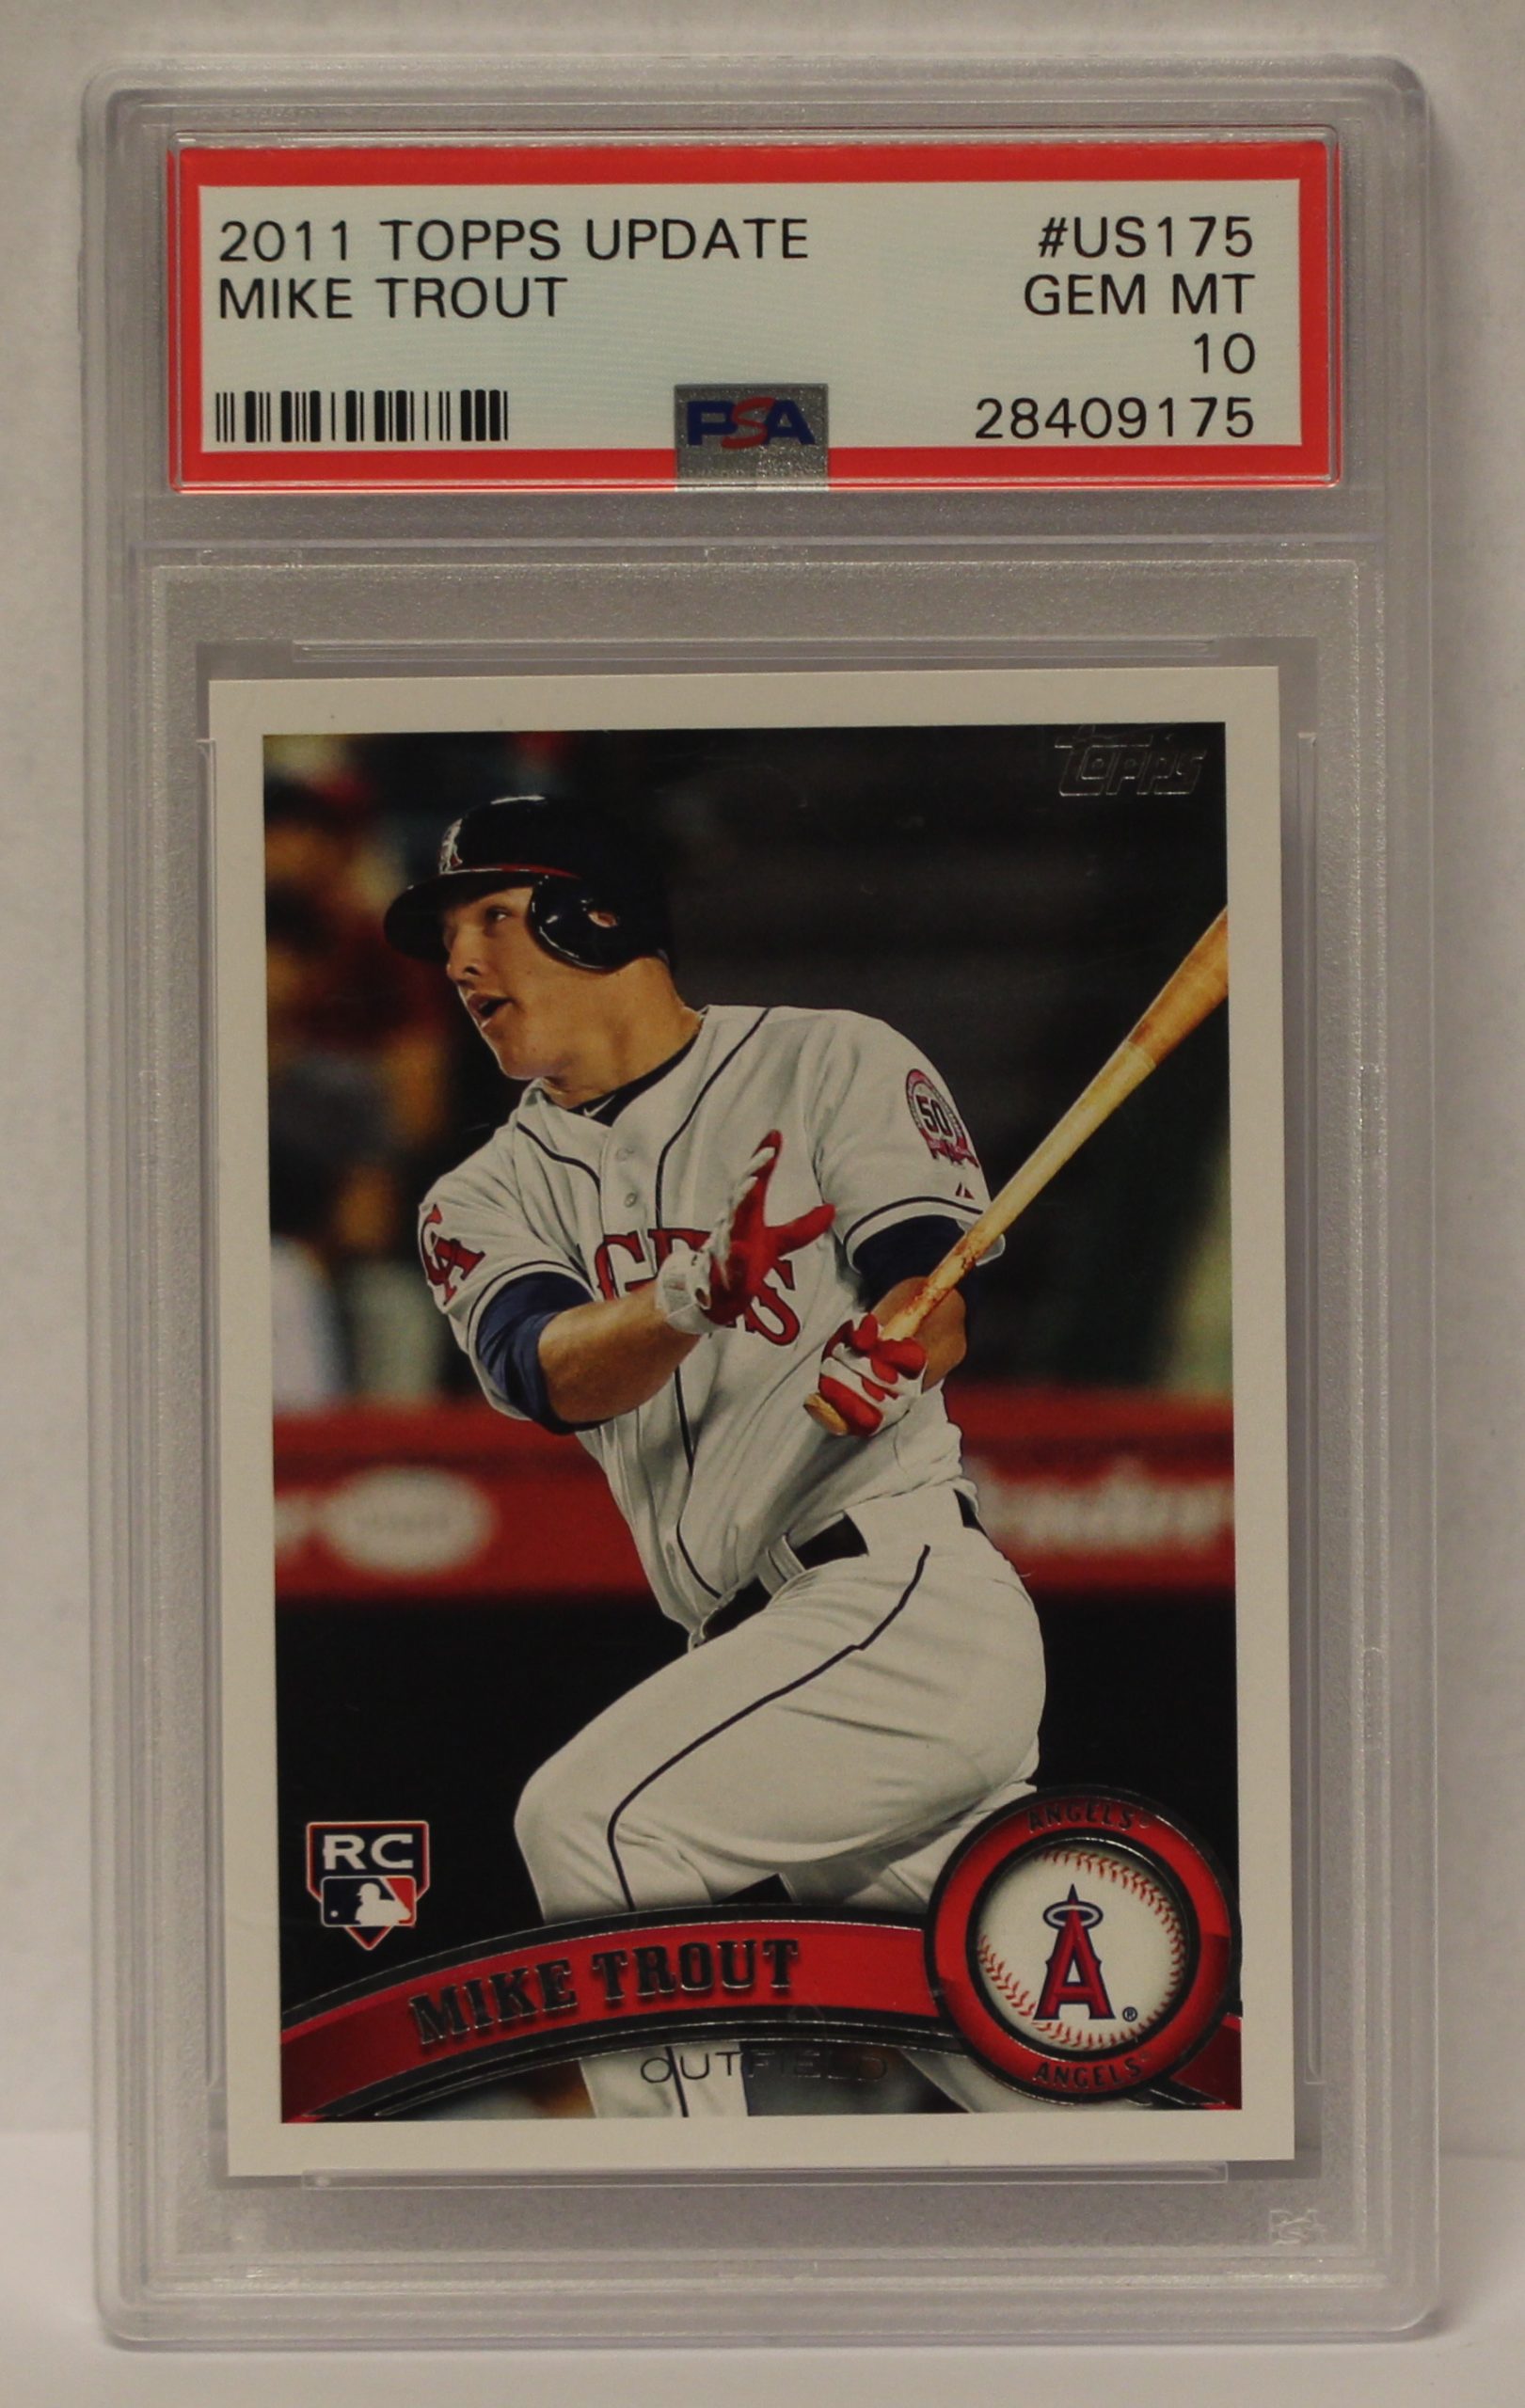 2011 Topps Update MIKE TROUT Rookie Card (#US175) PSA 10